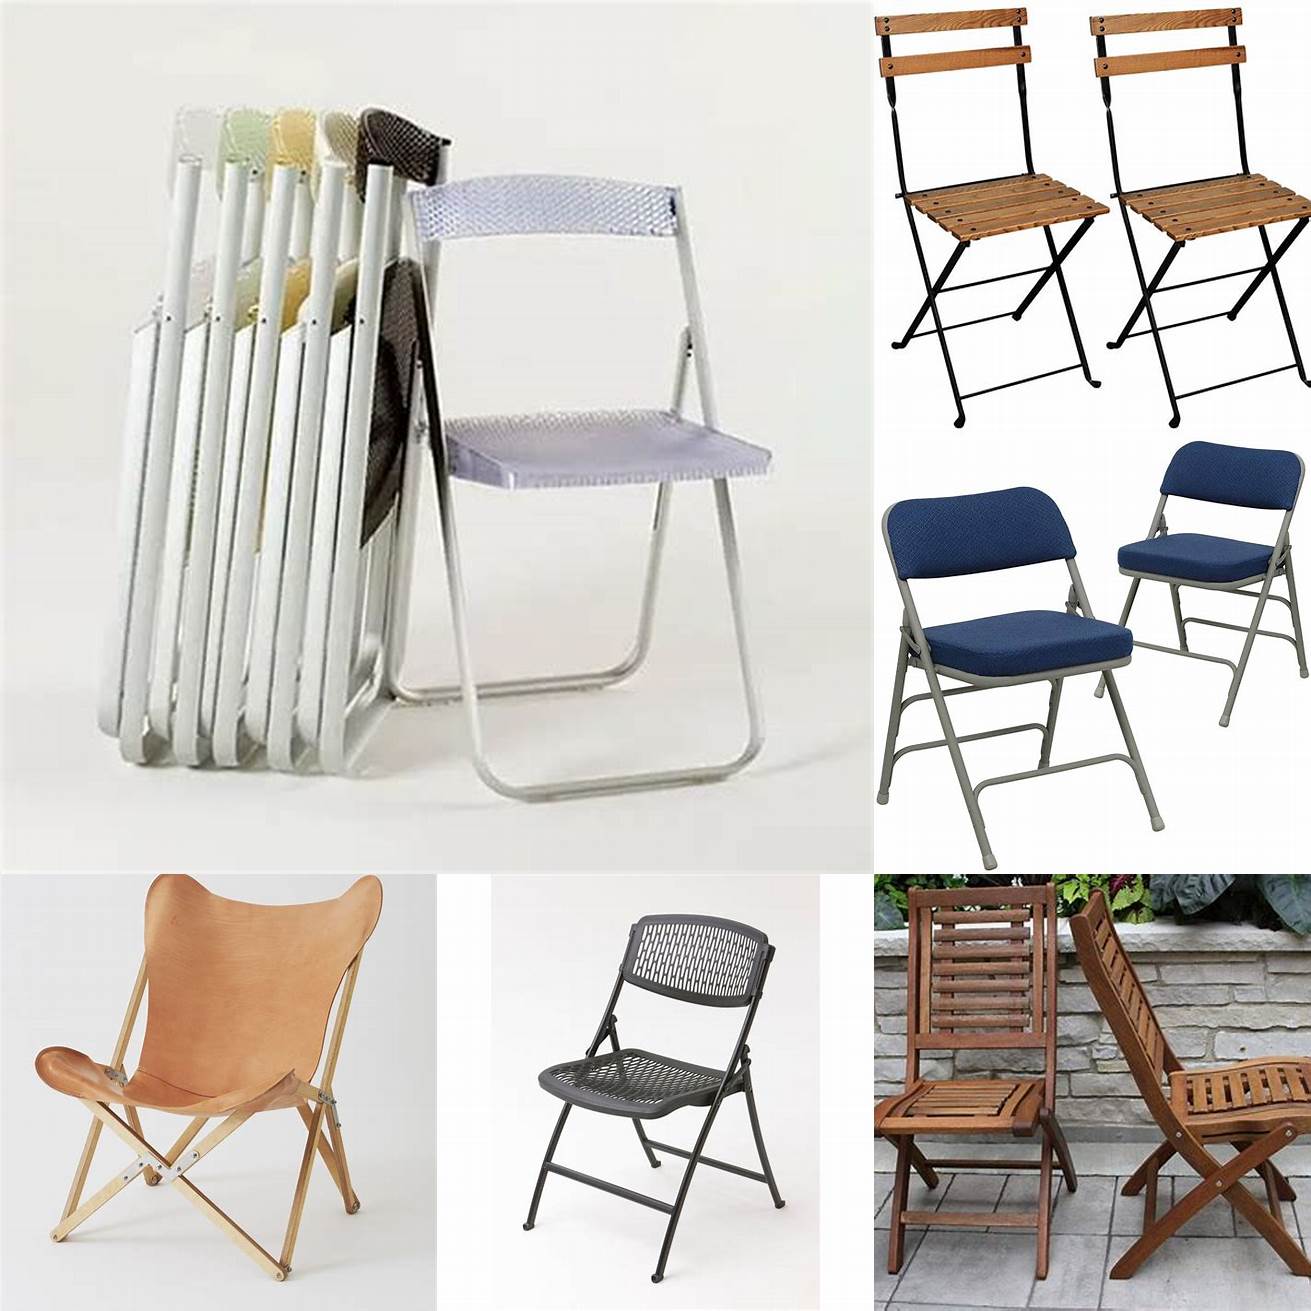 Folding chairs are perfect for small spaces as they can be easily stored away when not in use